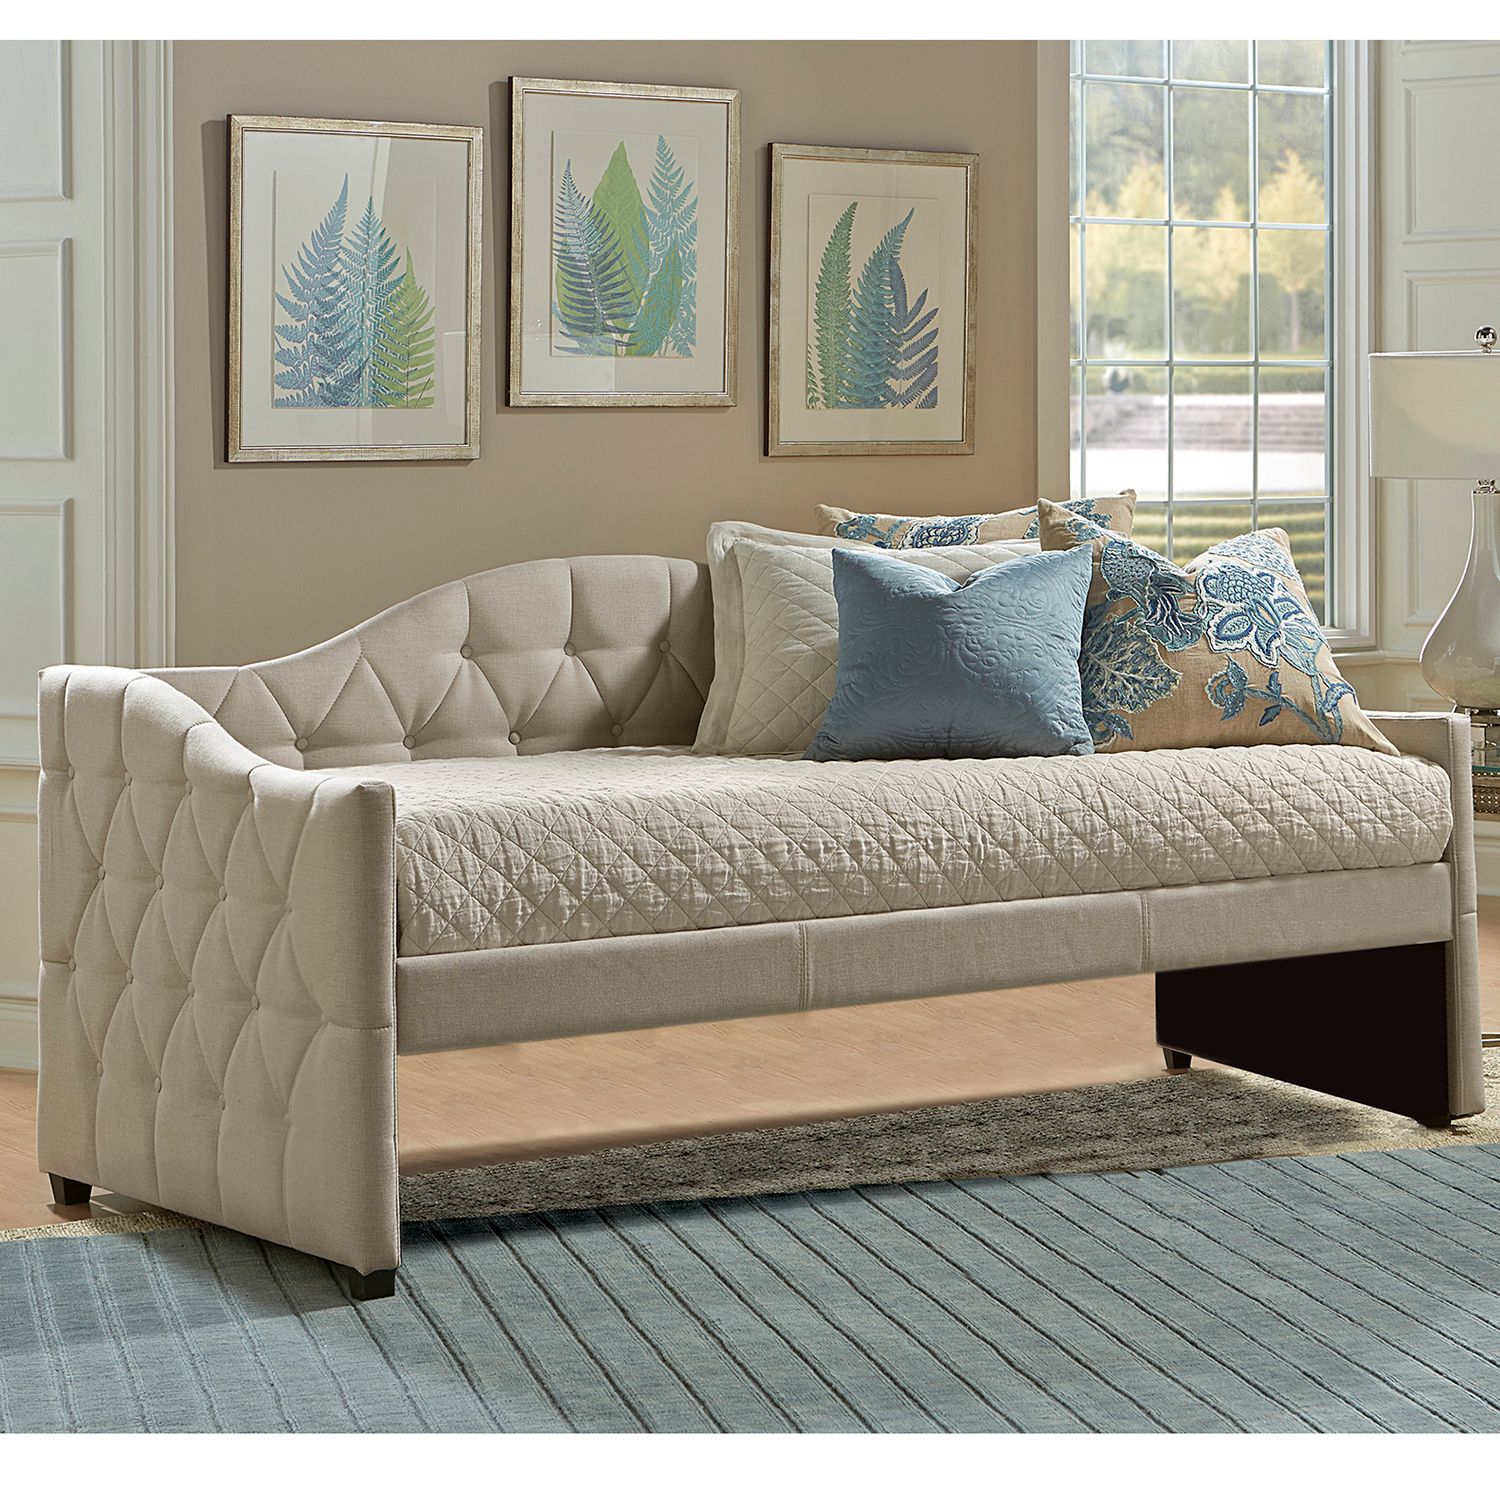 Image for Hillsdale Furniture Jamie Tufted Daybed at Kohl's.